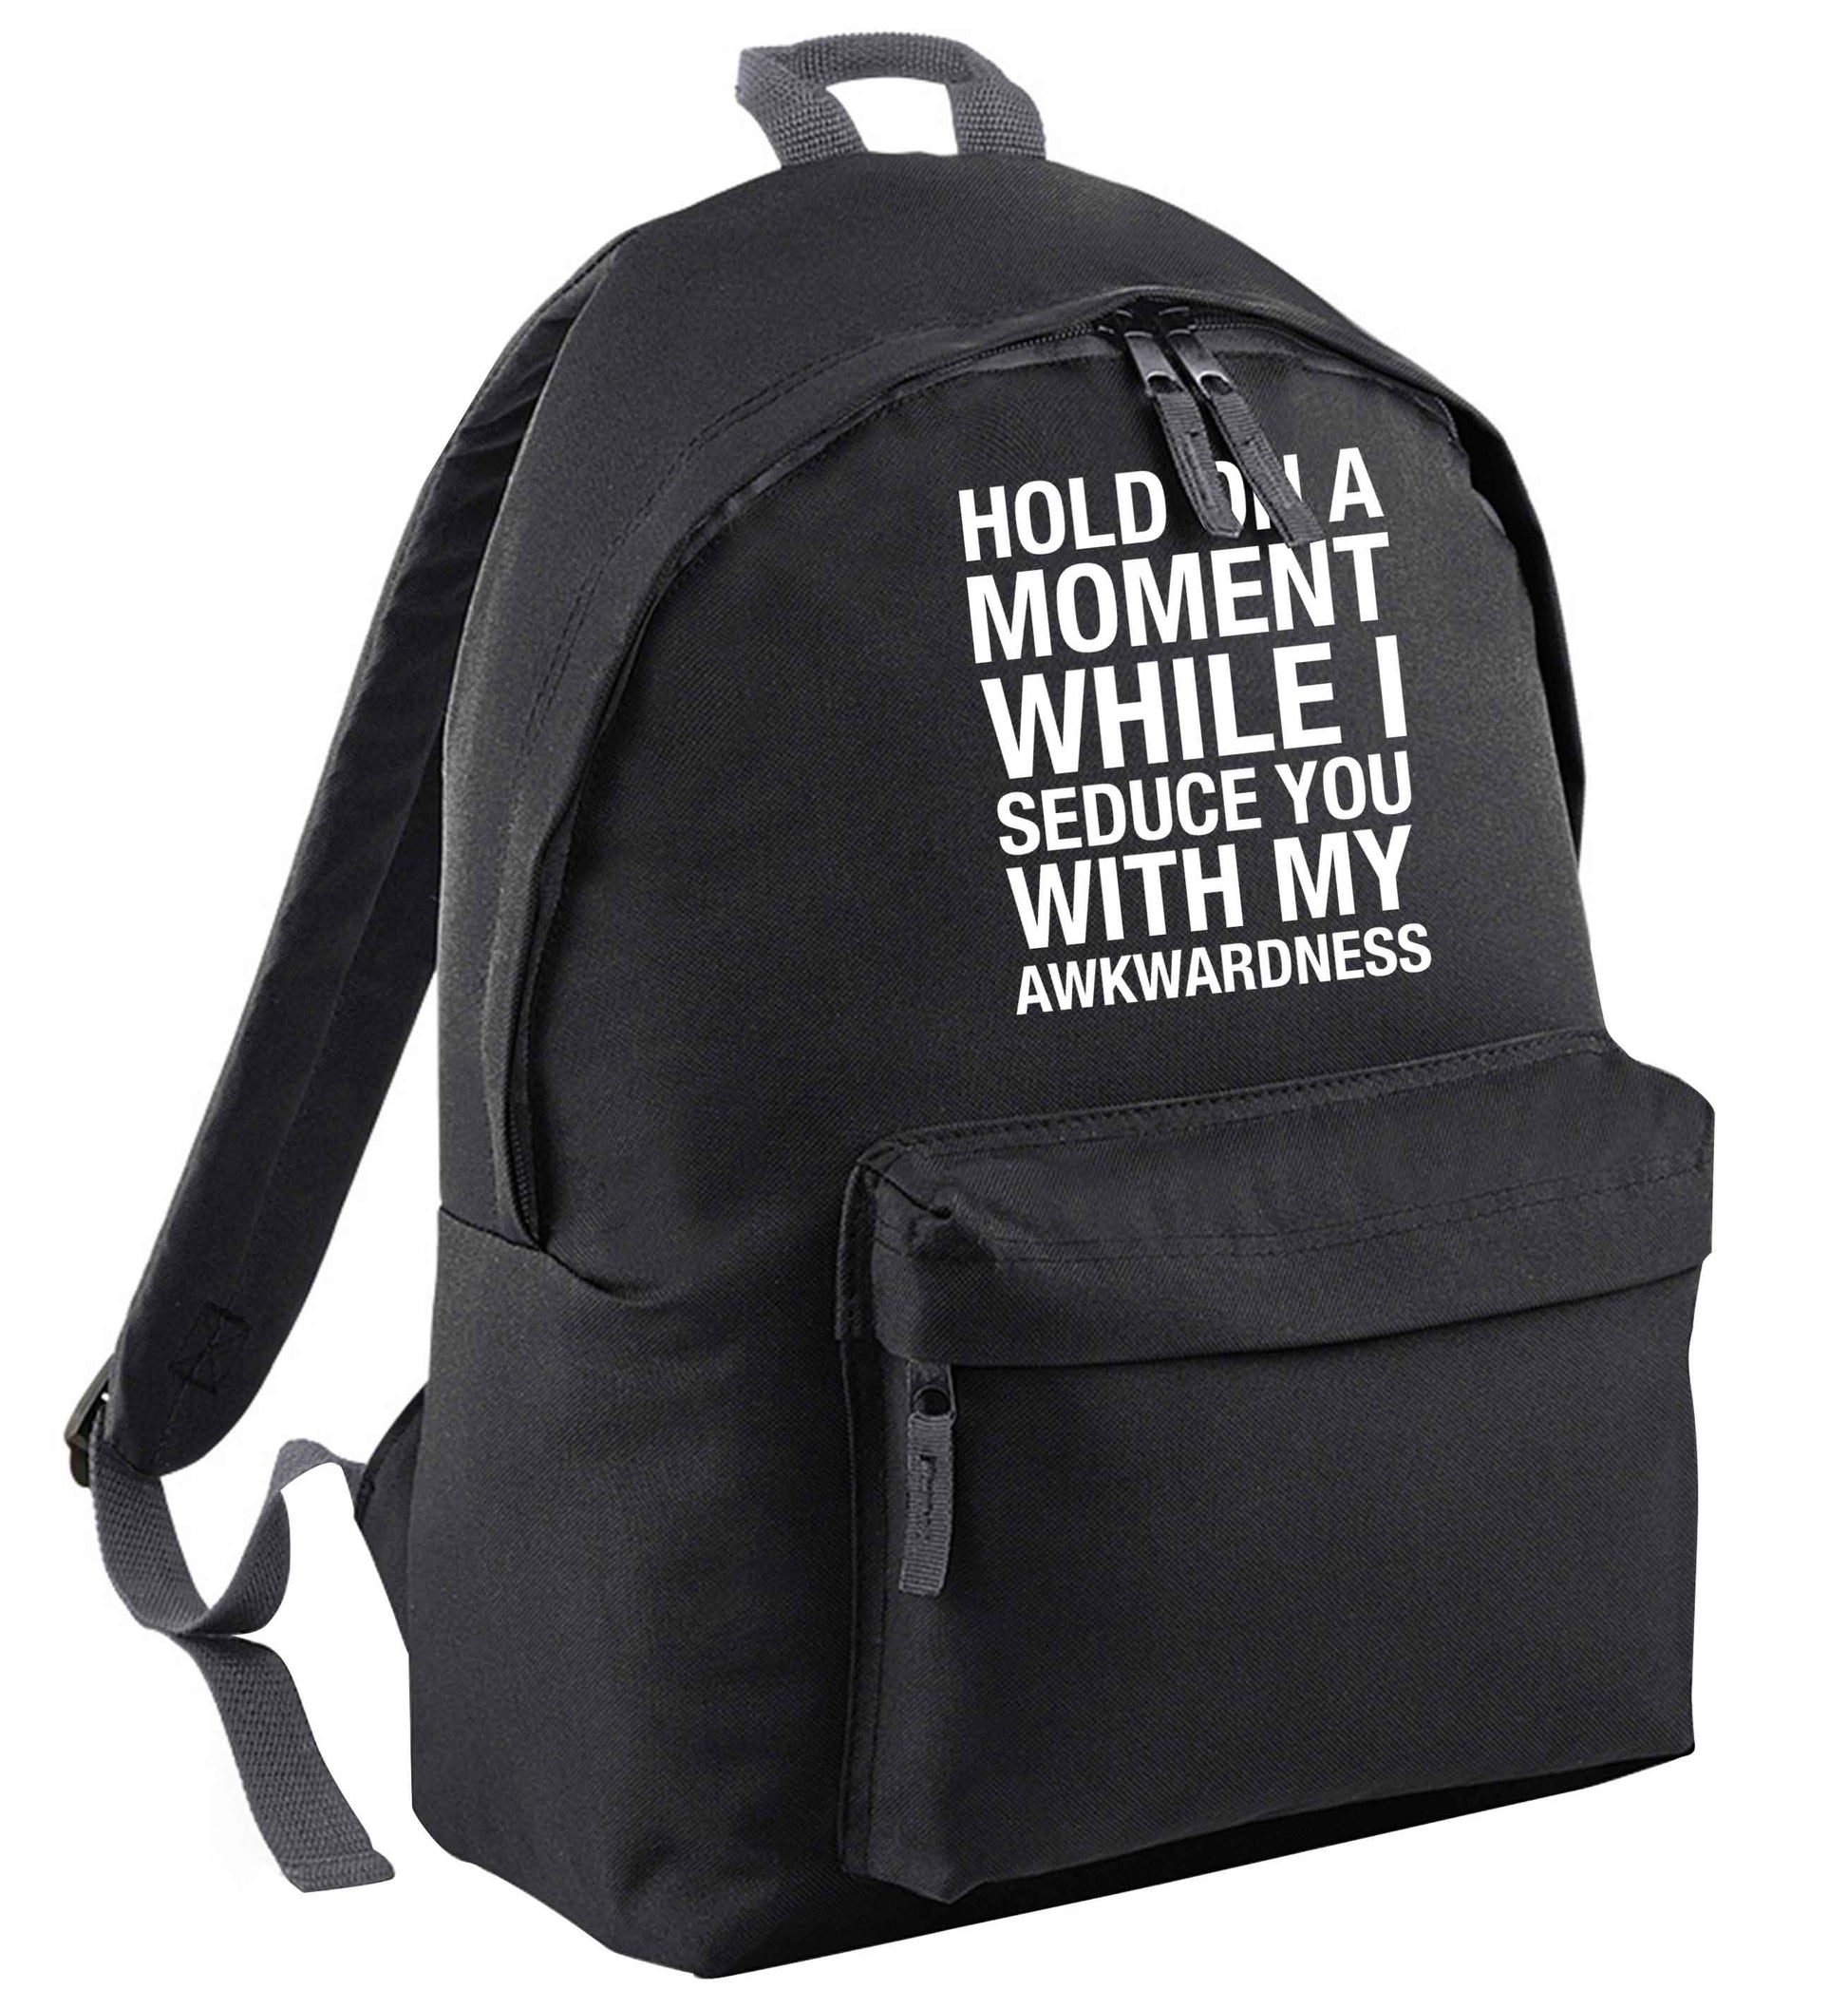 Hold on a moment while I seduce you with my awkwardness black adults backpack